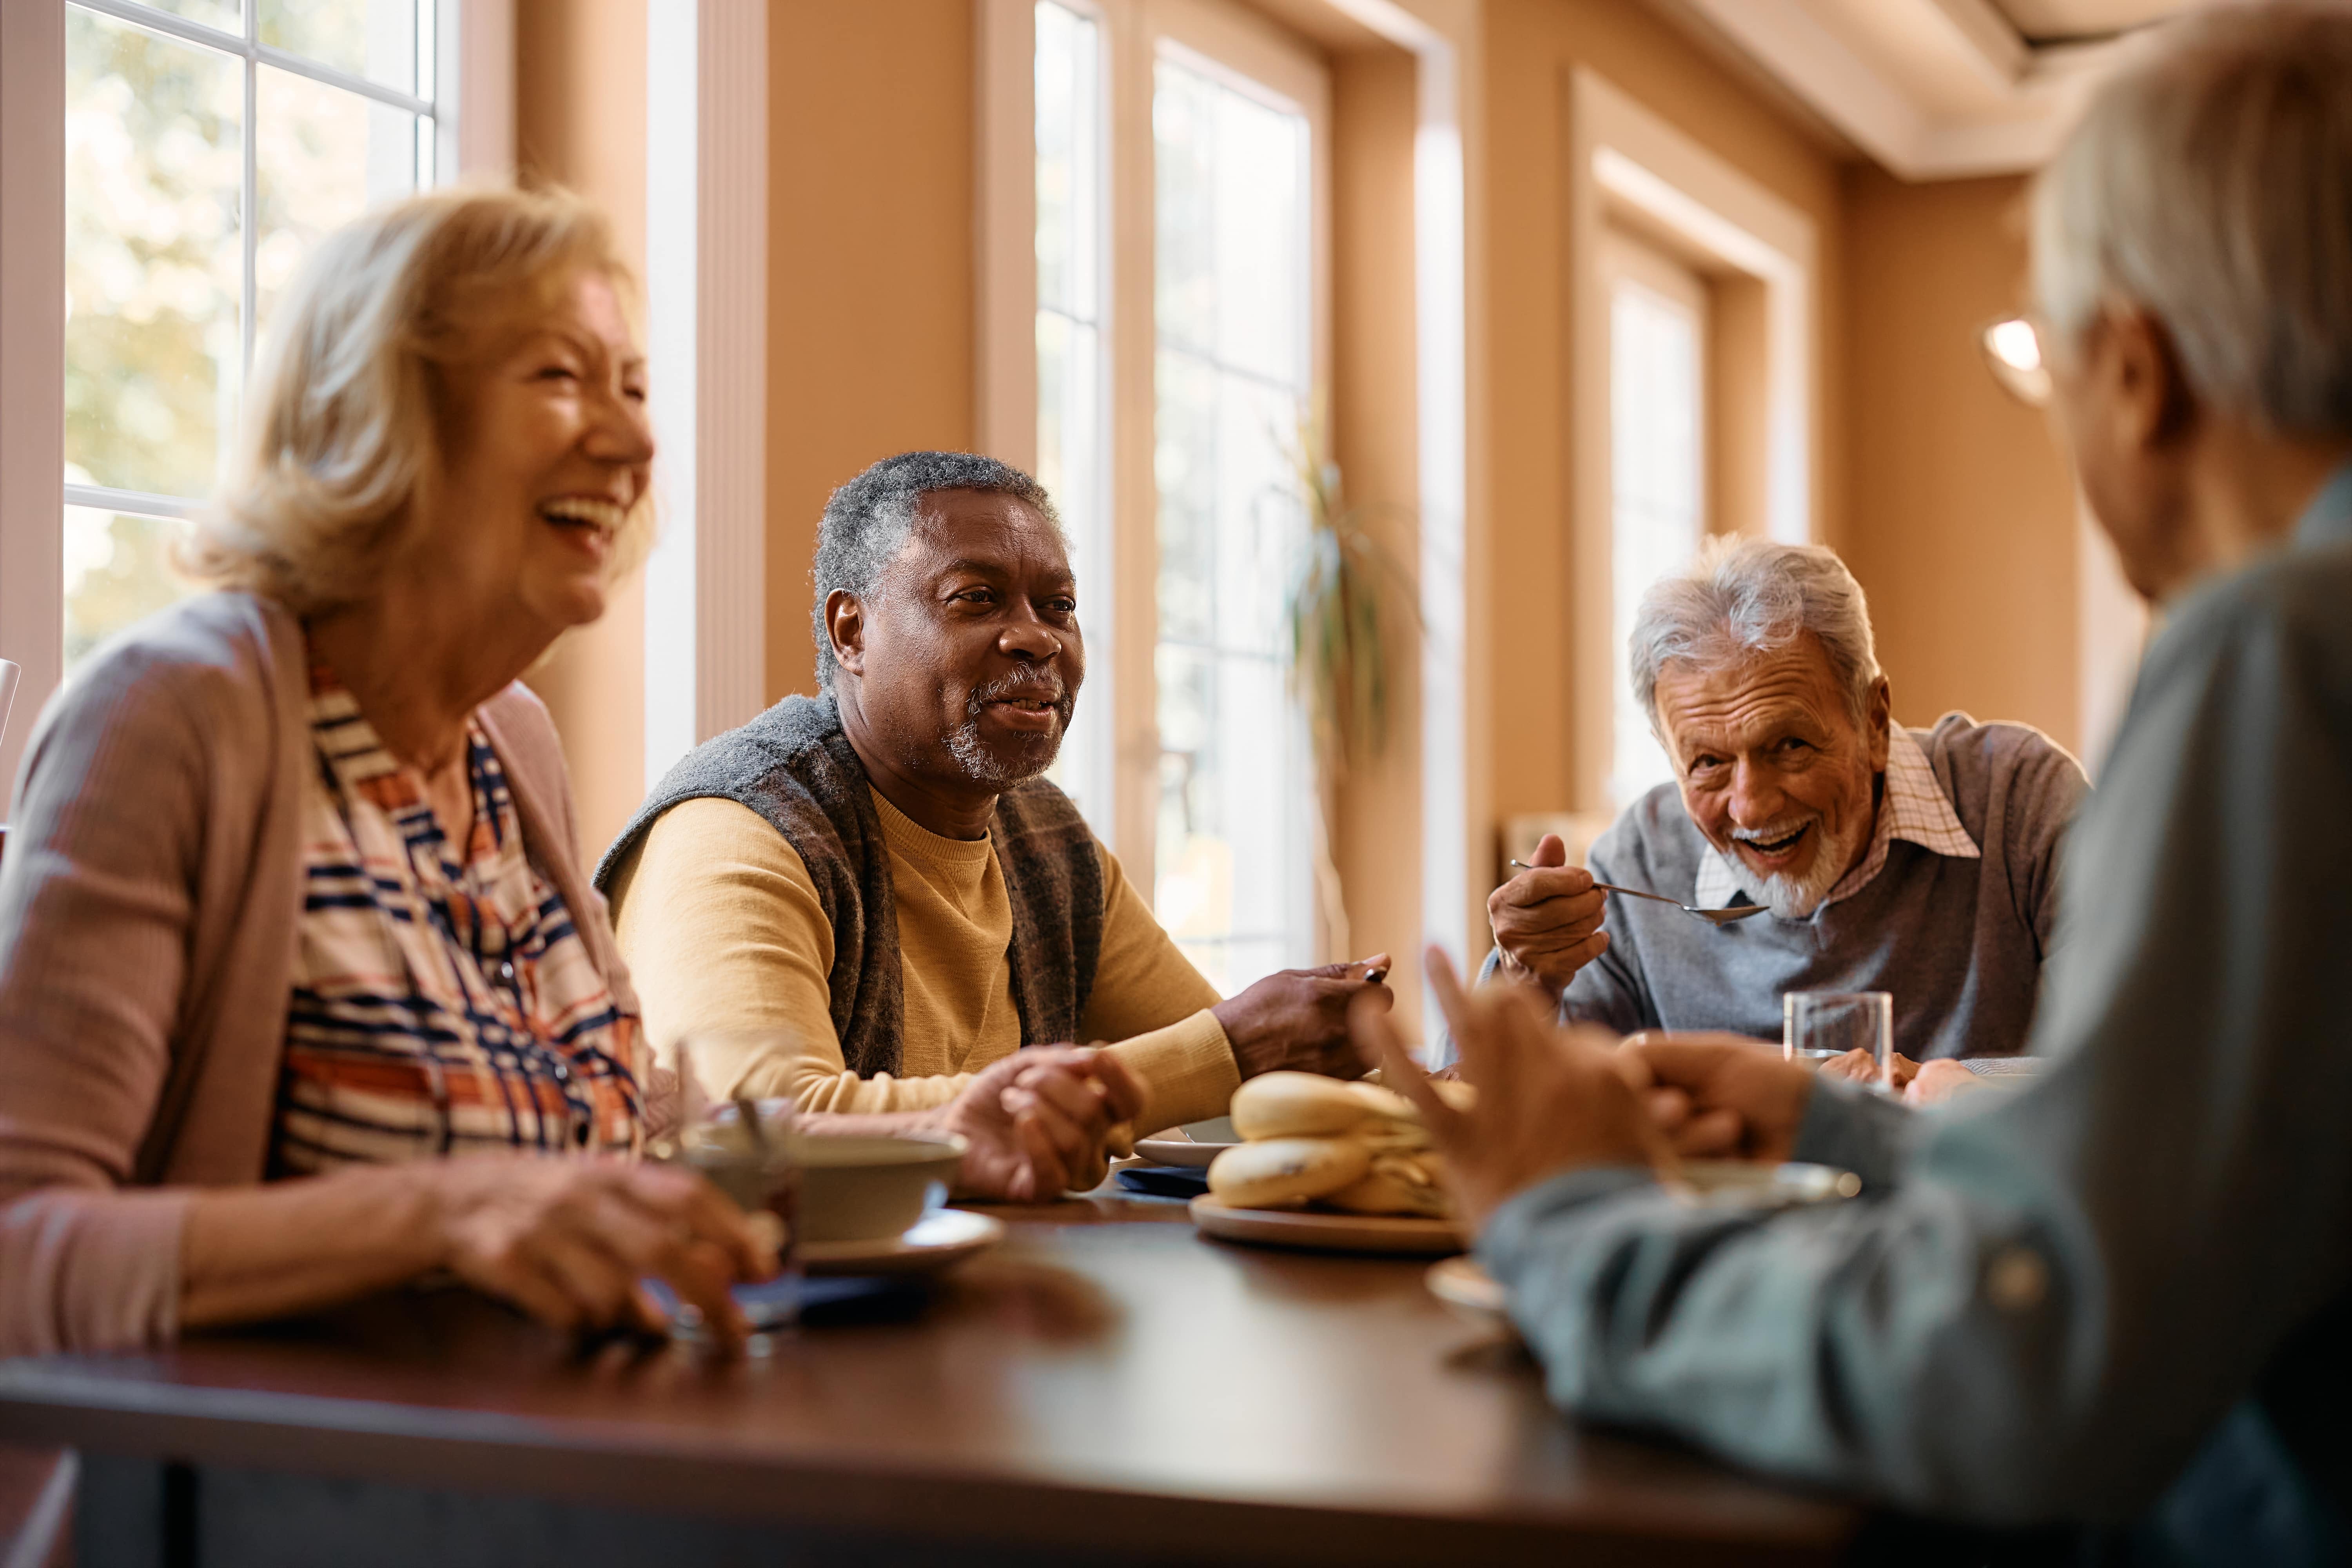 A group of older adults enjoying a conversation over a meal